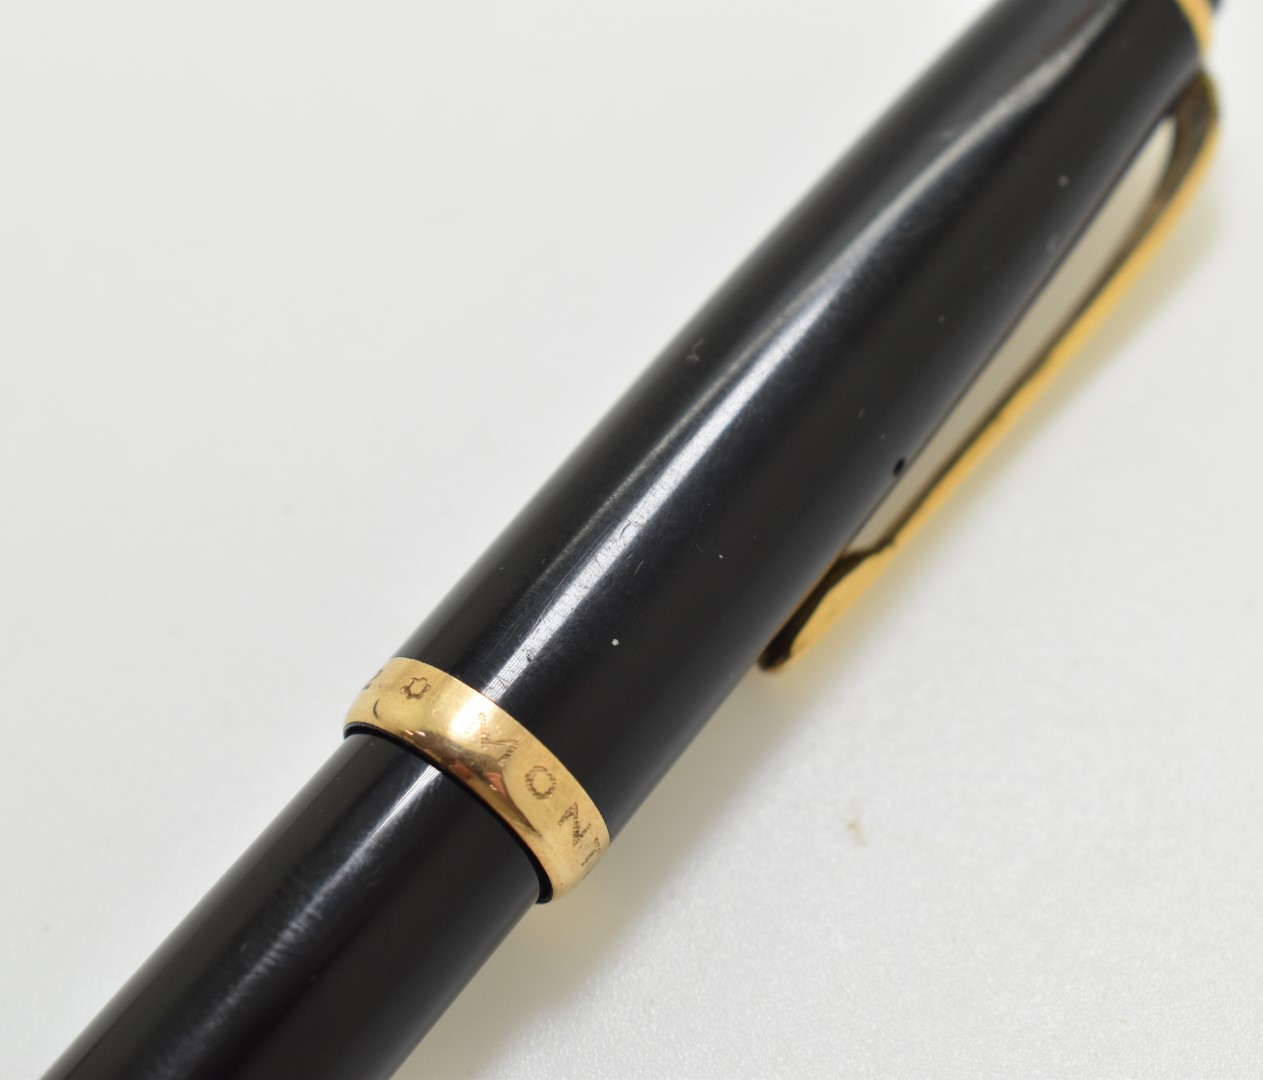 Montblanc 342 fountain pen with number 2 nib, black resin body and gold plated fittings, in original - Image 7 of 10